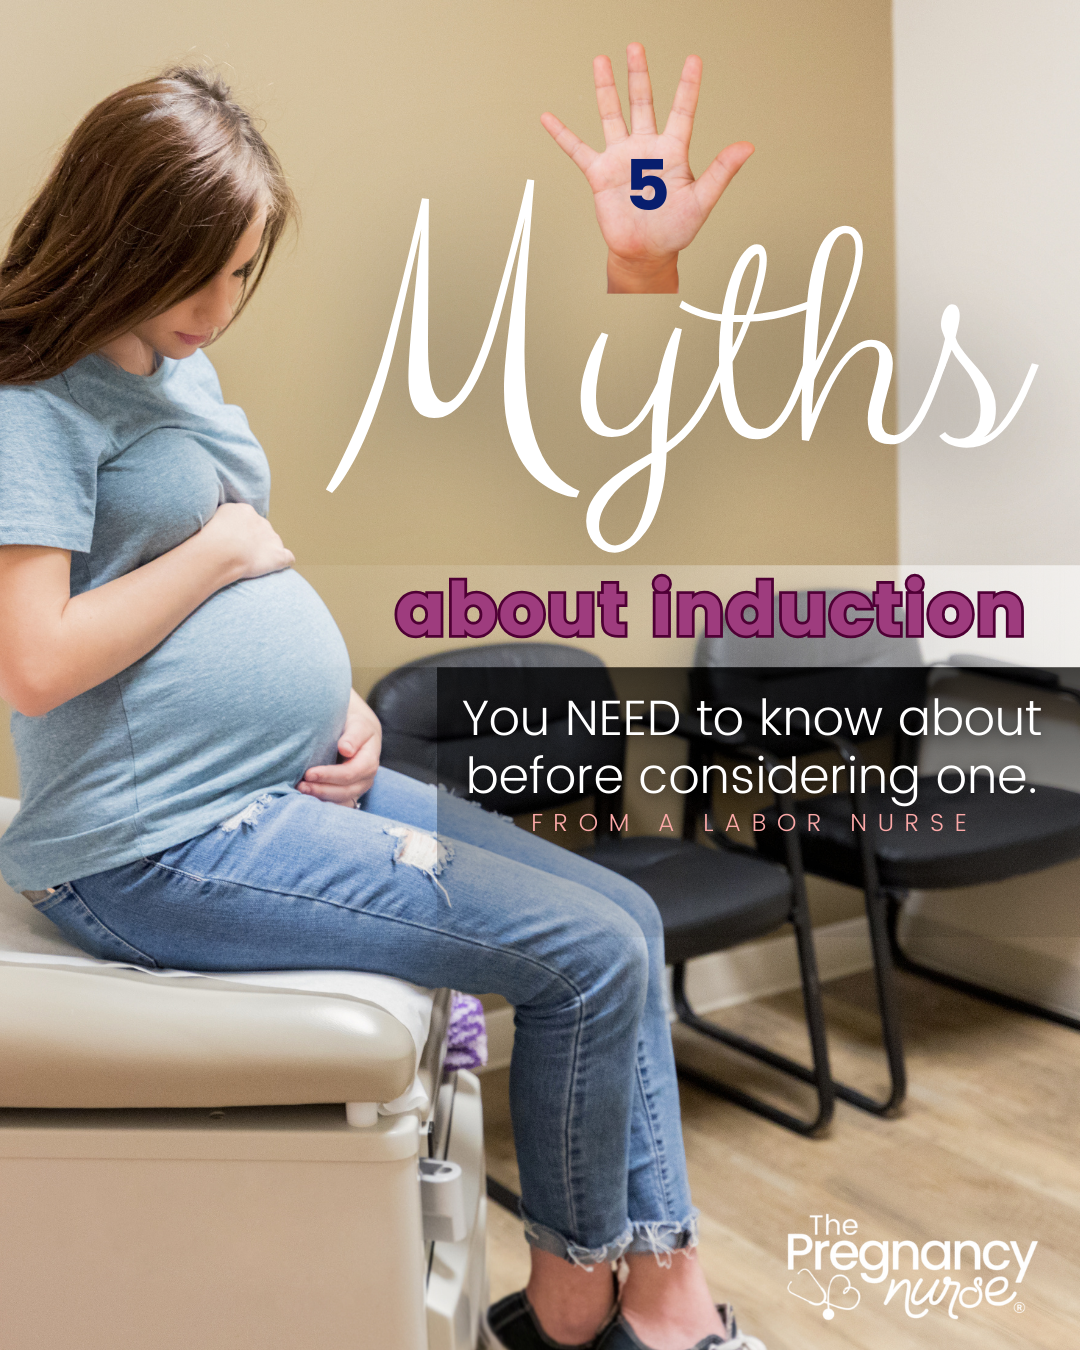 Debunking induction myths! Are you considering labor induction? Read this informative article to learn the truth behind common myths about induction methods. Gain a better understanding of the risks, benefits, and misconceptions surrounding labor induction. #PregnancyTips #LaborInduction #ChildbirthMyths